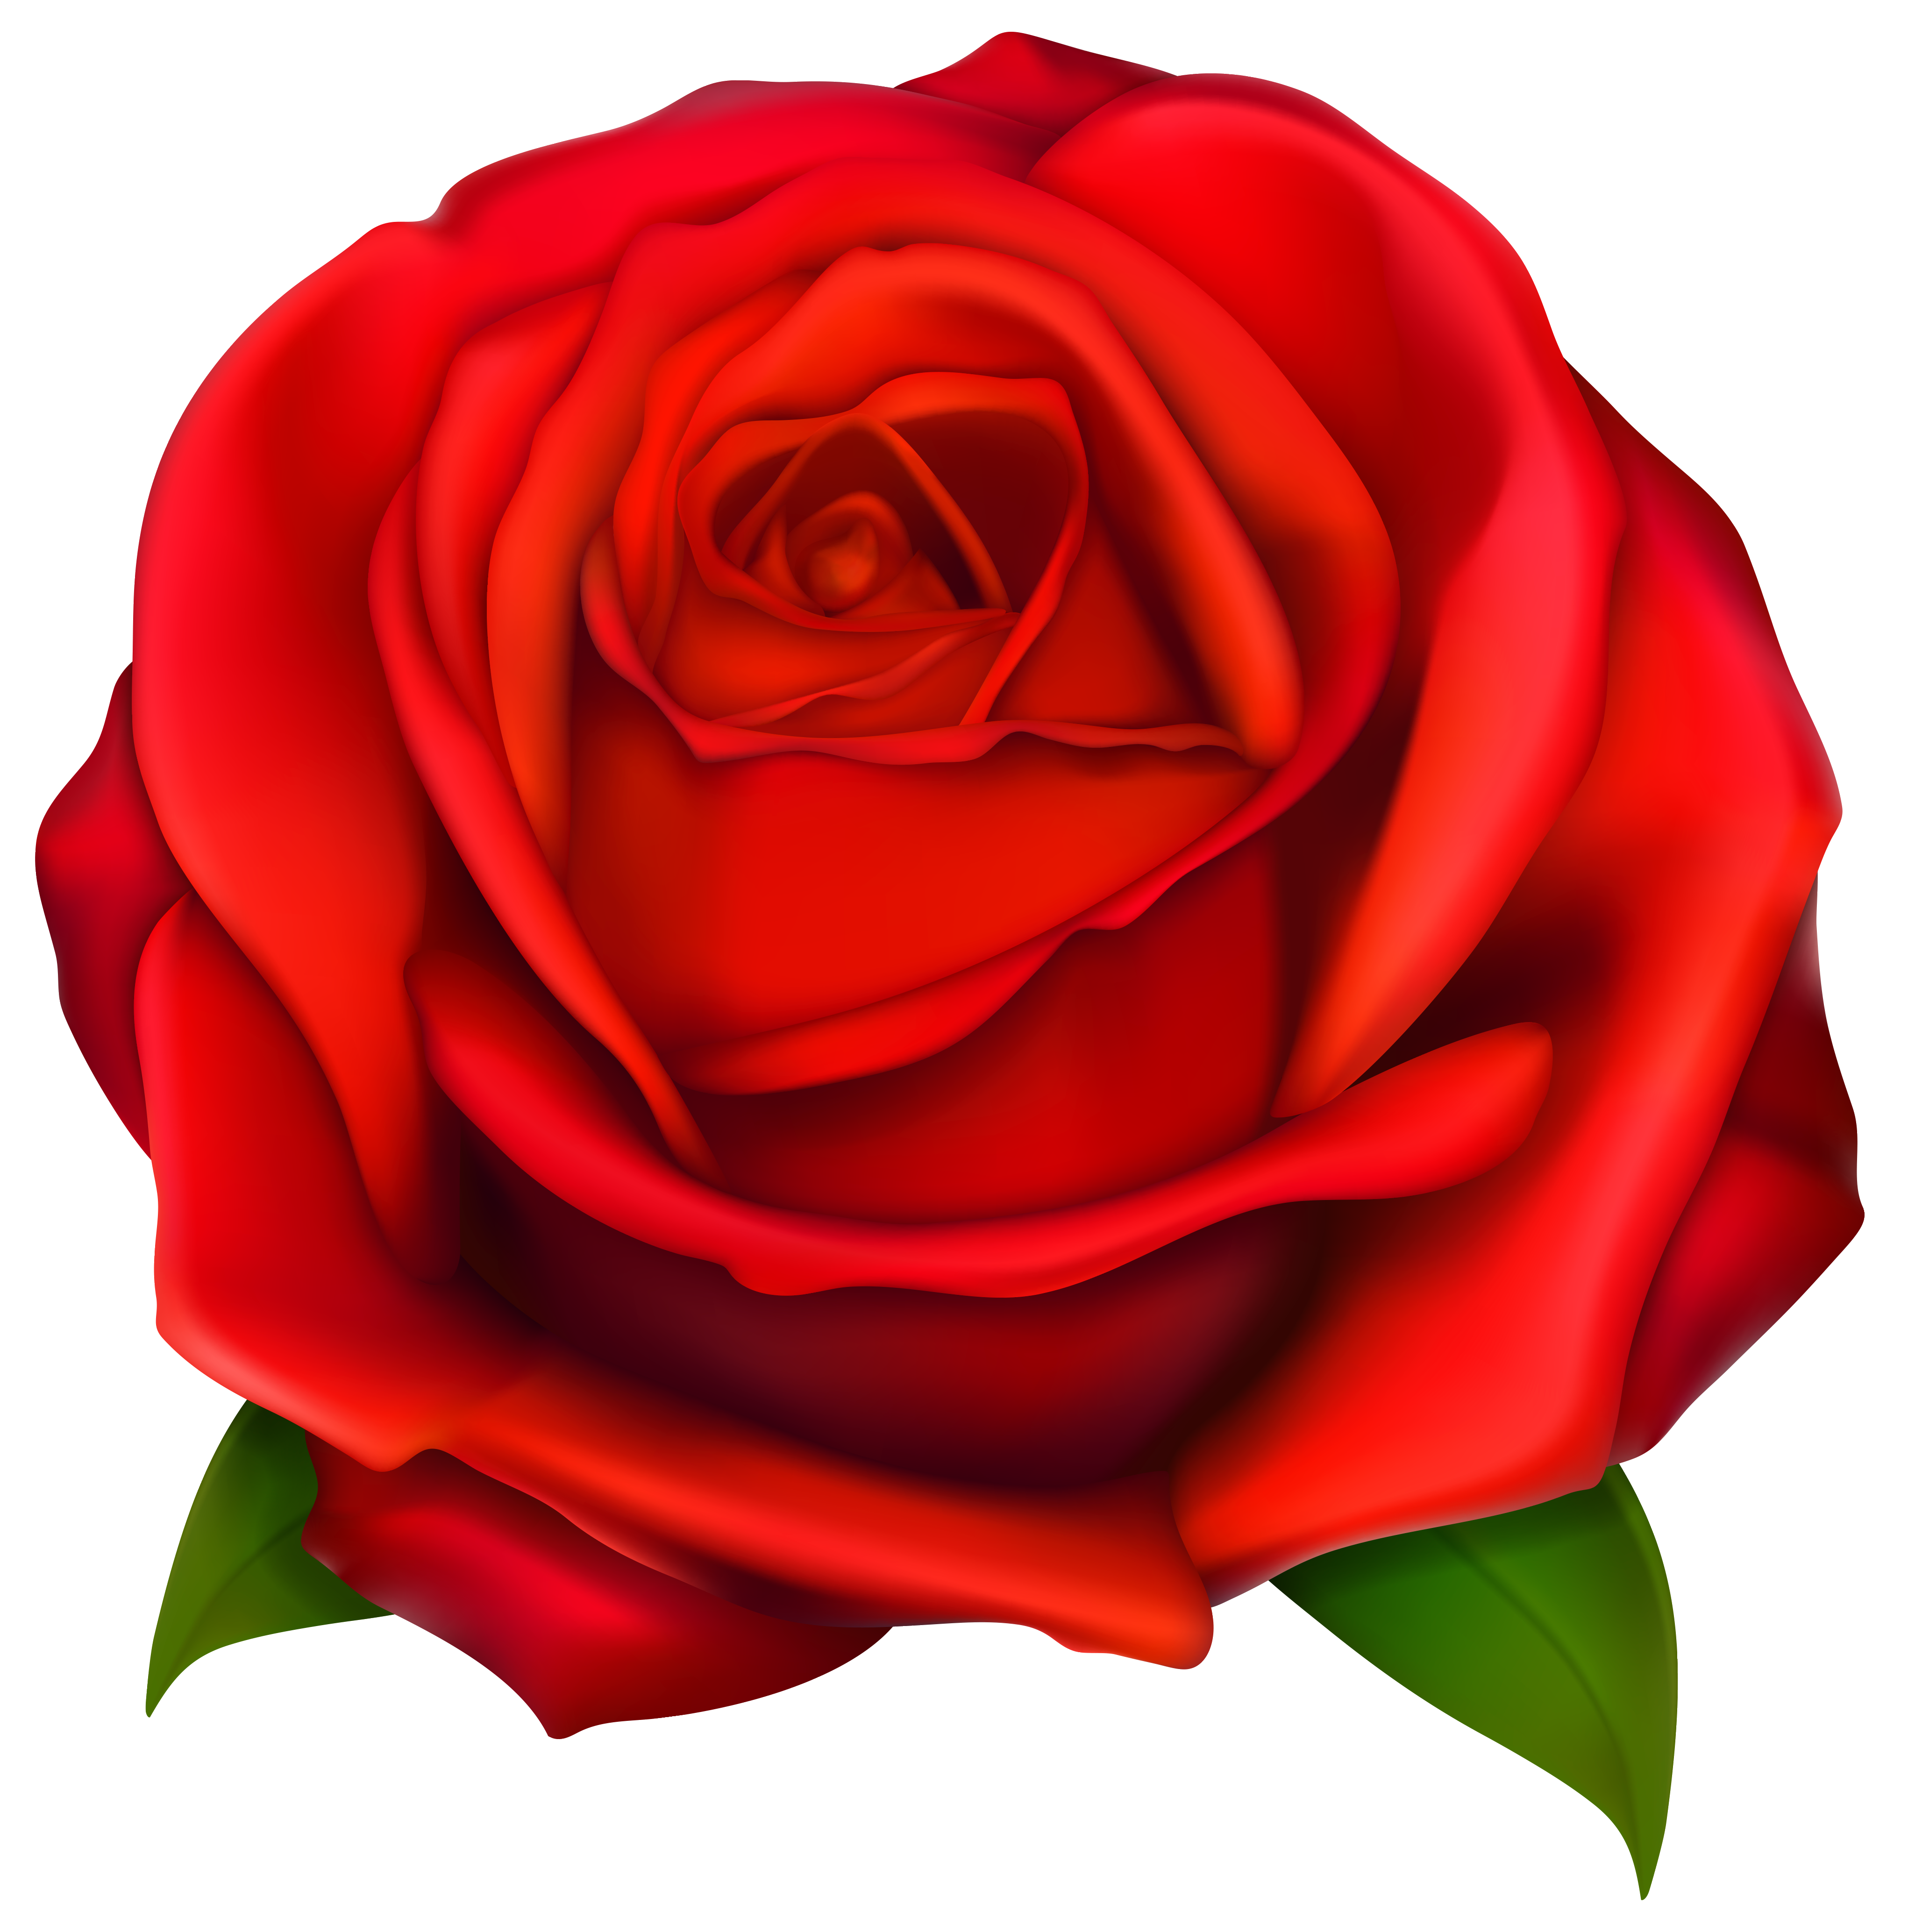 Clipart rose. Image of clip art